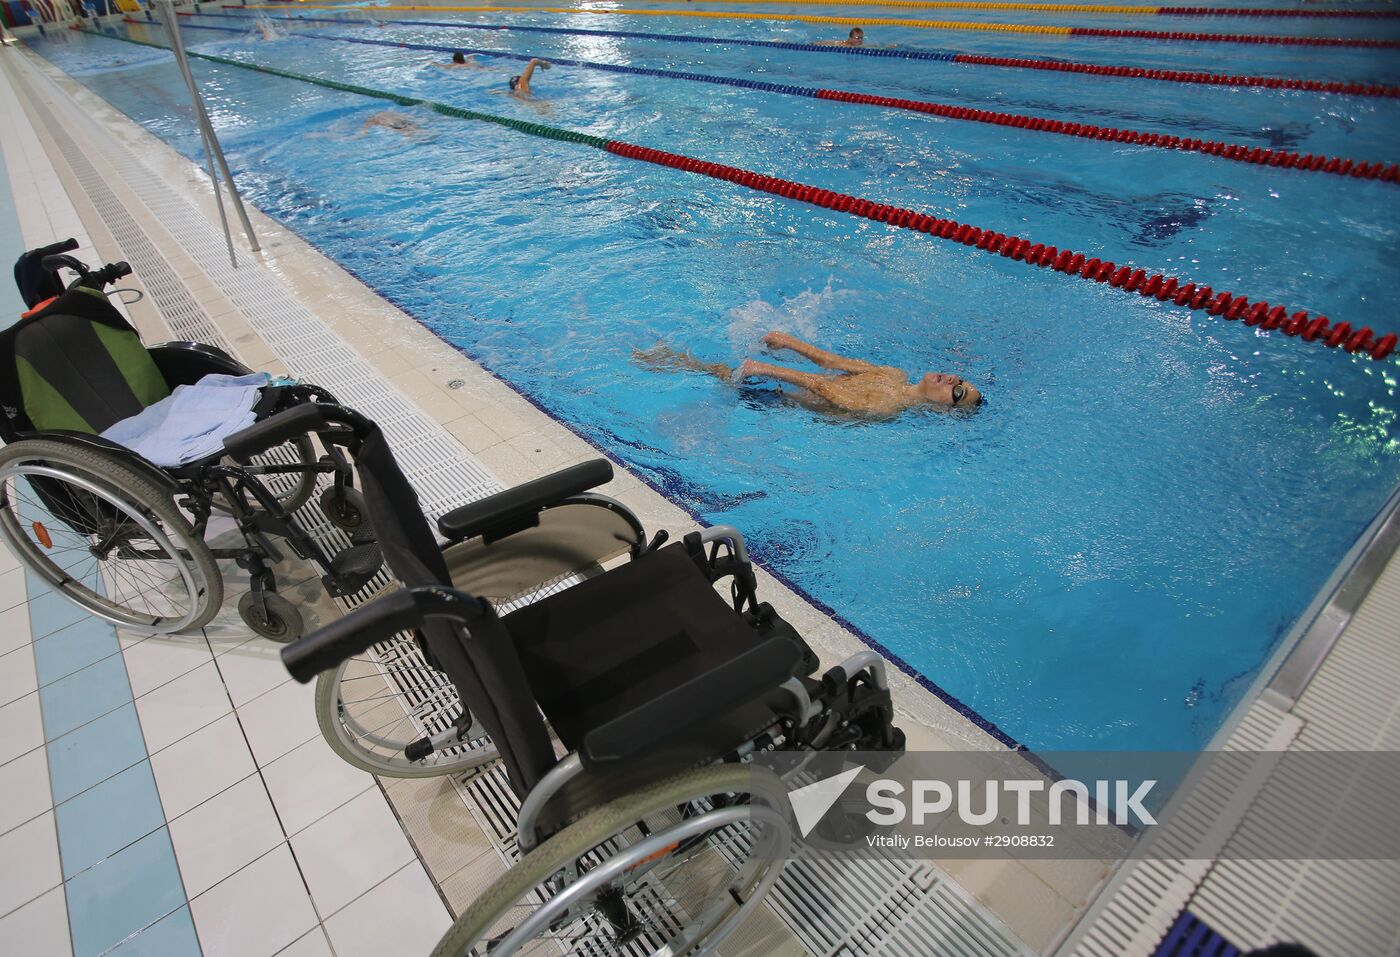 Russian Paralympic swimming team during training session